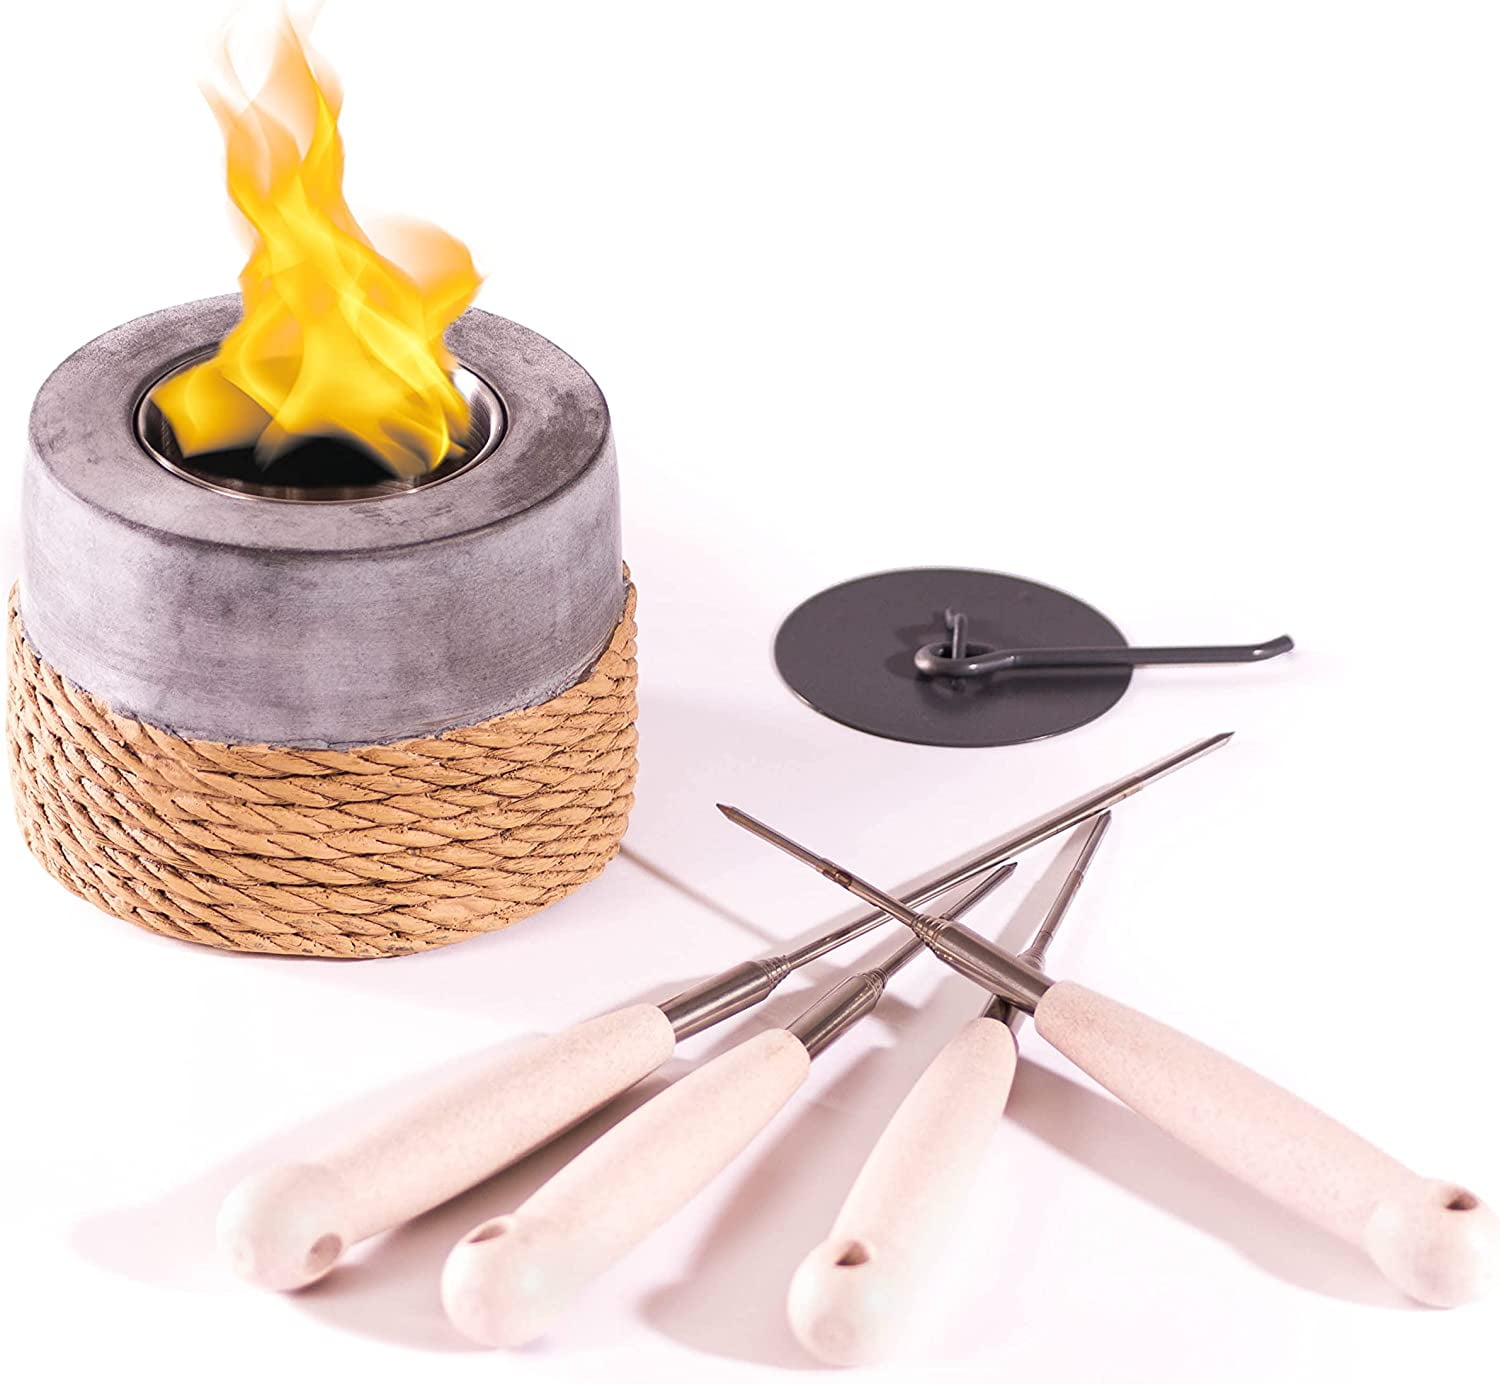 Vivzone Tabletop Fireplace - Personal Fireplace,Concrete Bowl Indoor Smores  Maker Mini Fire Pit